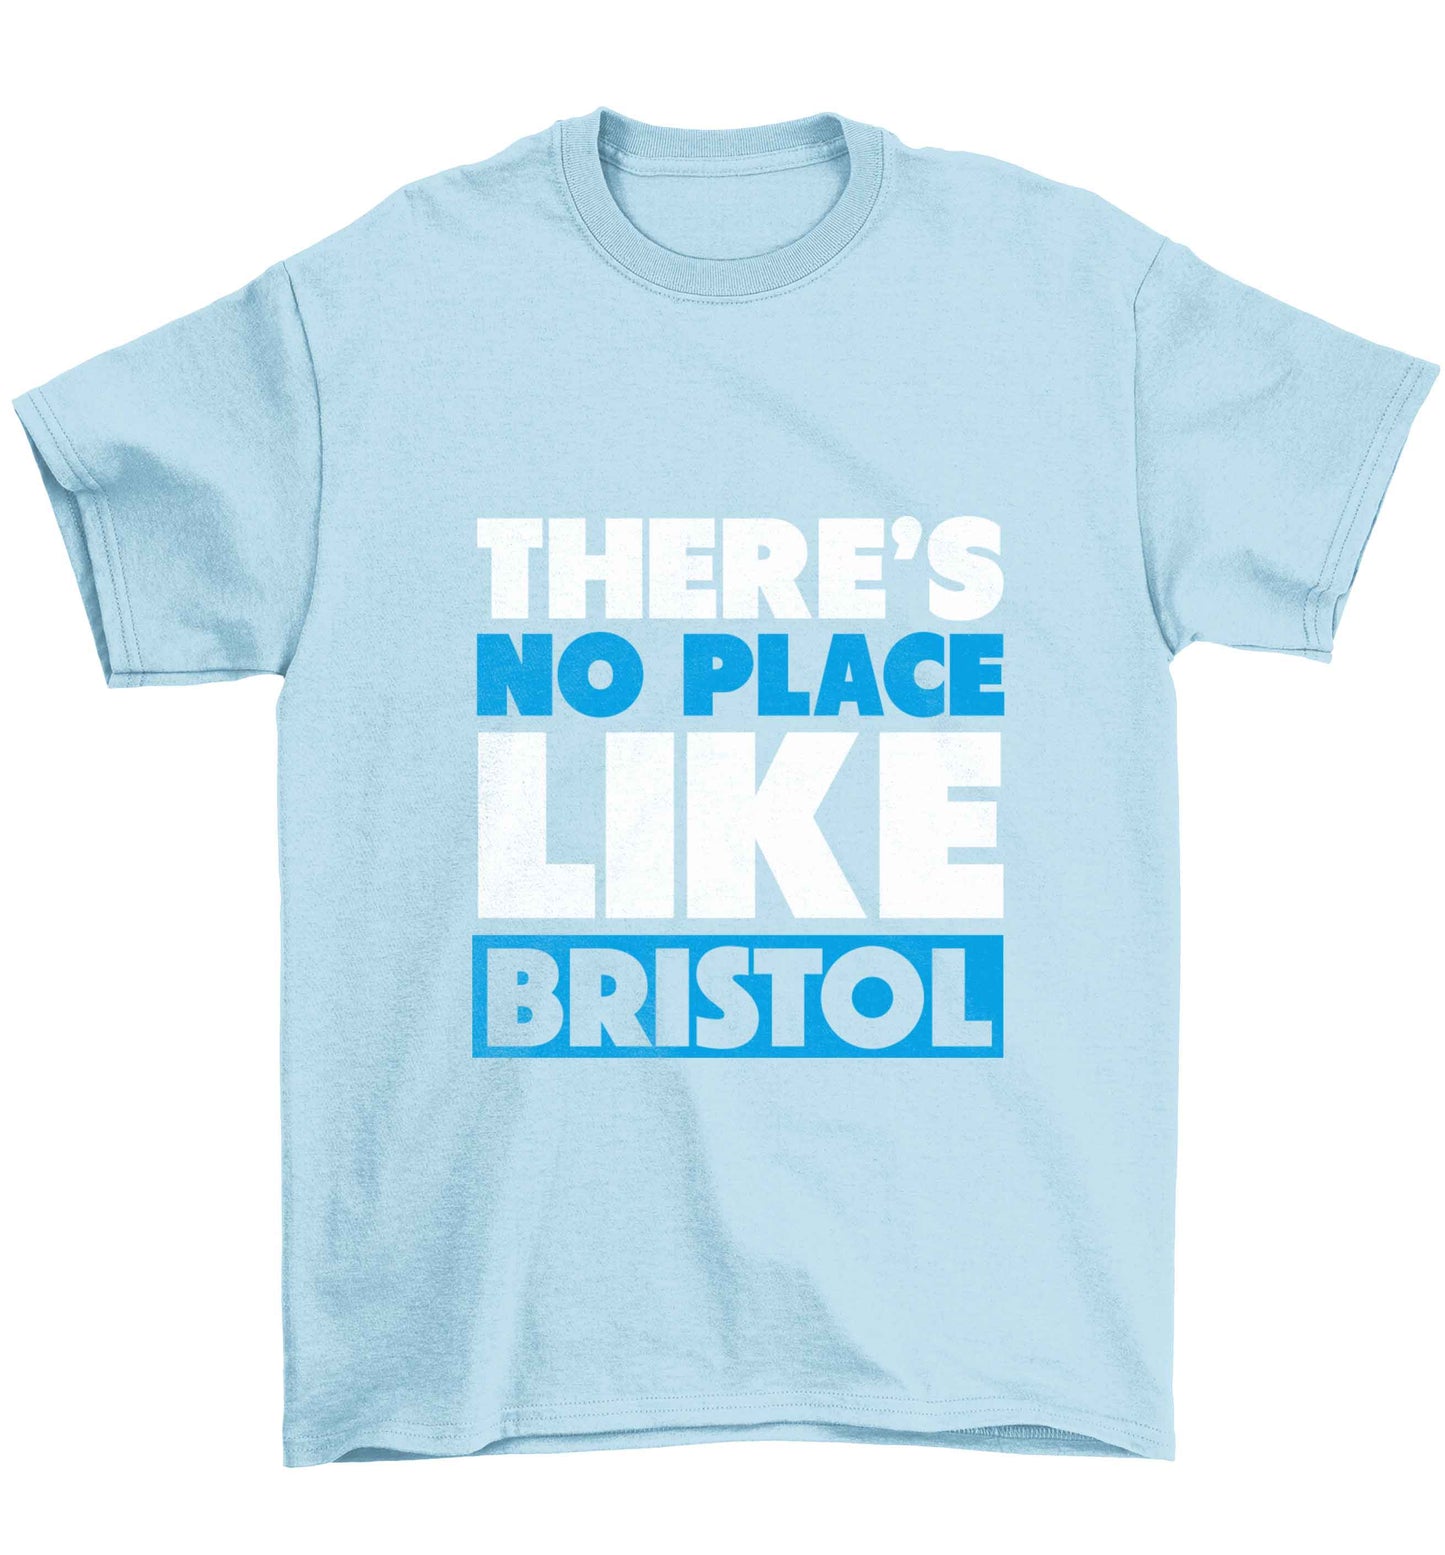 There's no place like Bristol Children's light blue Tshirt 12-13 Years